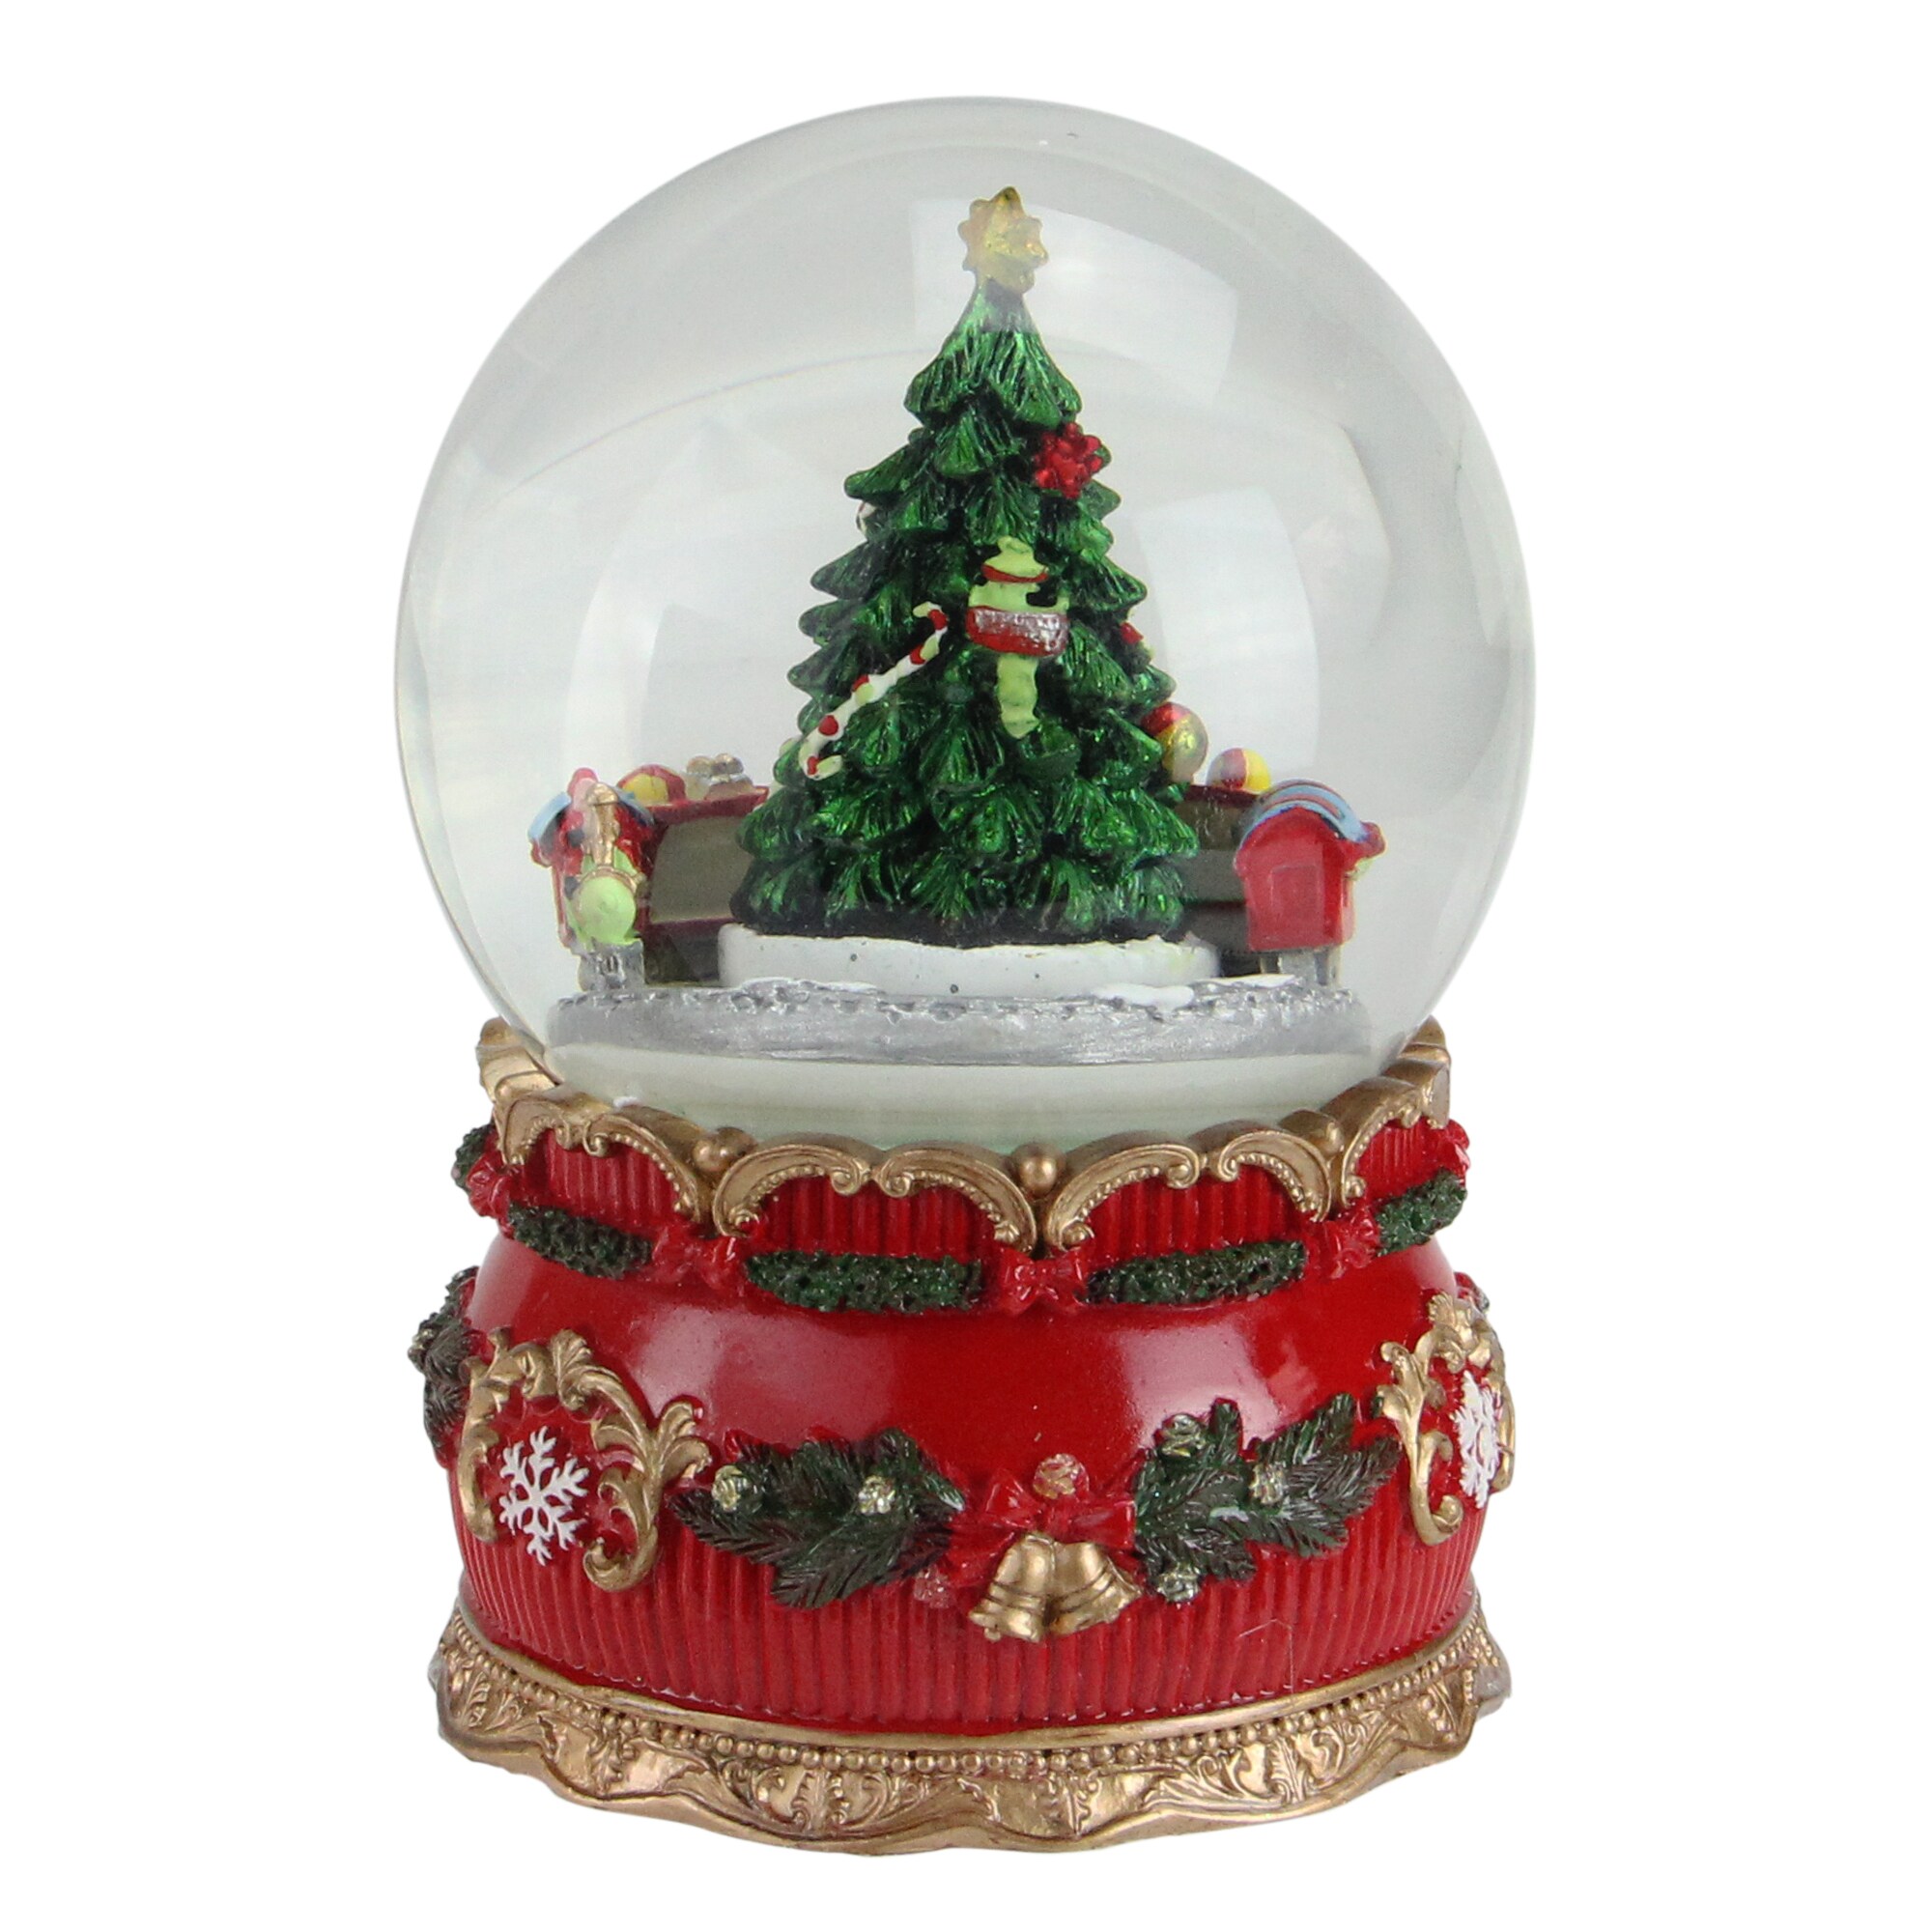 Northlight 6-in Musical Decoration Tree Christmas Decor in the 